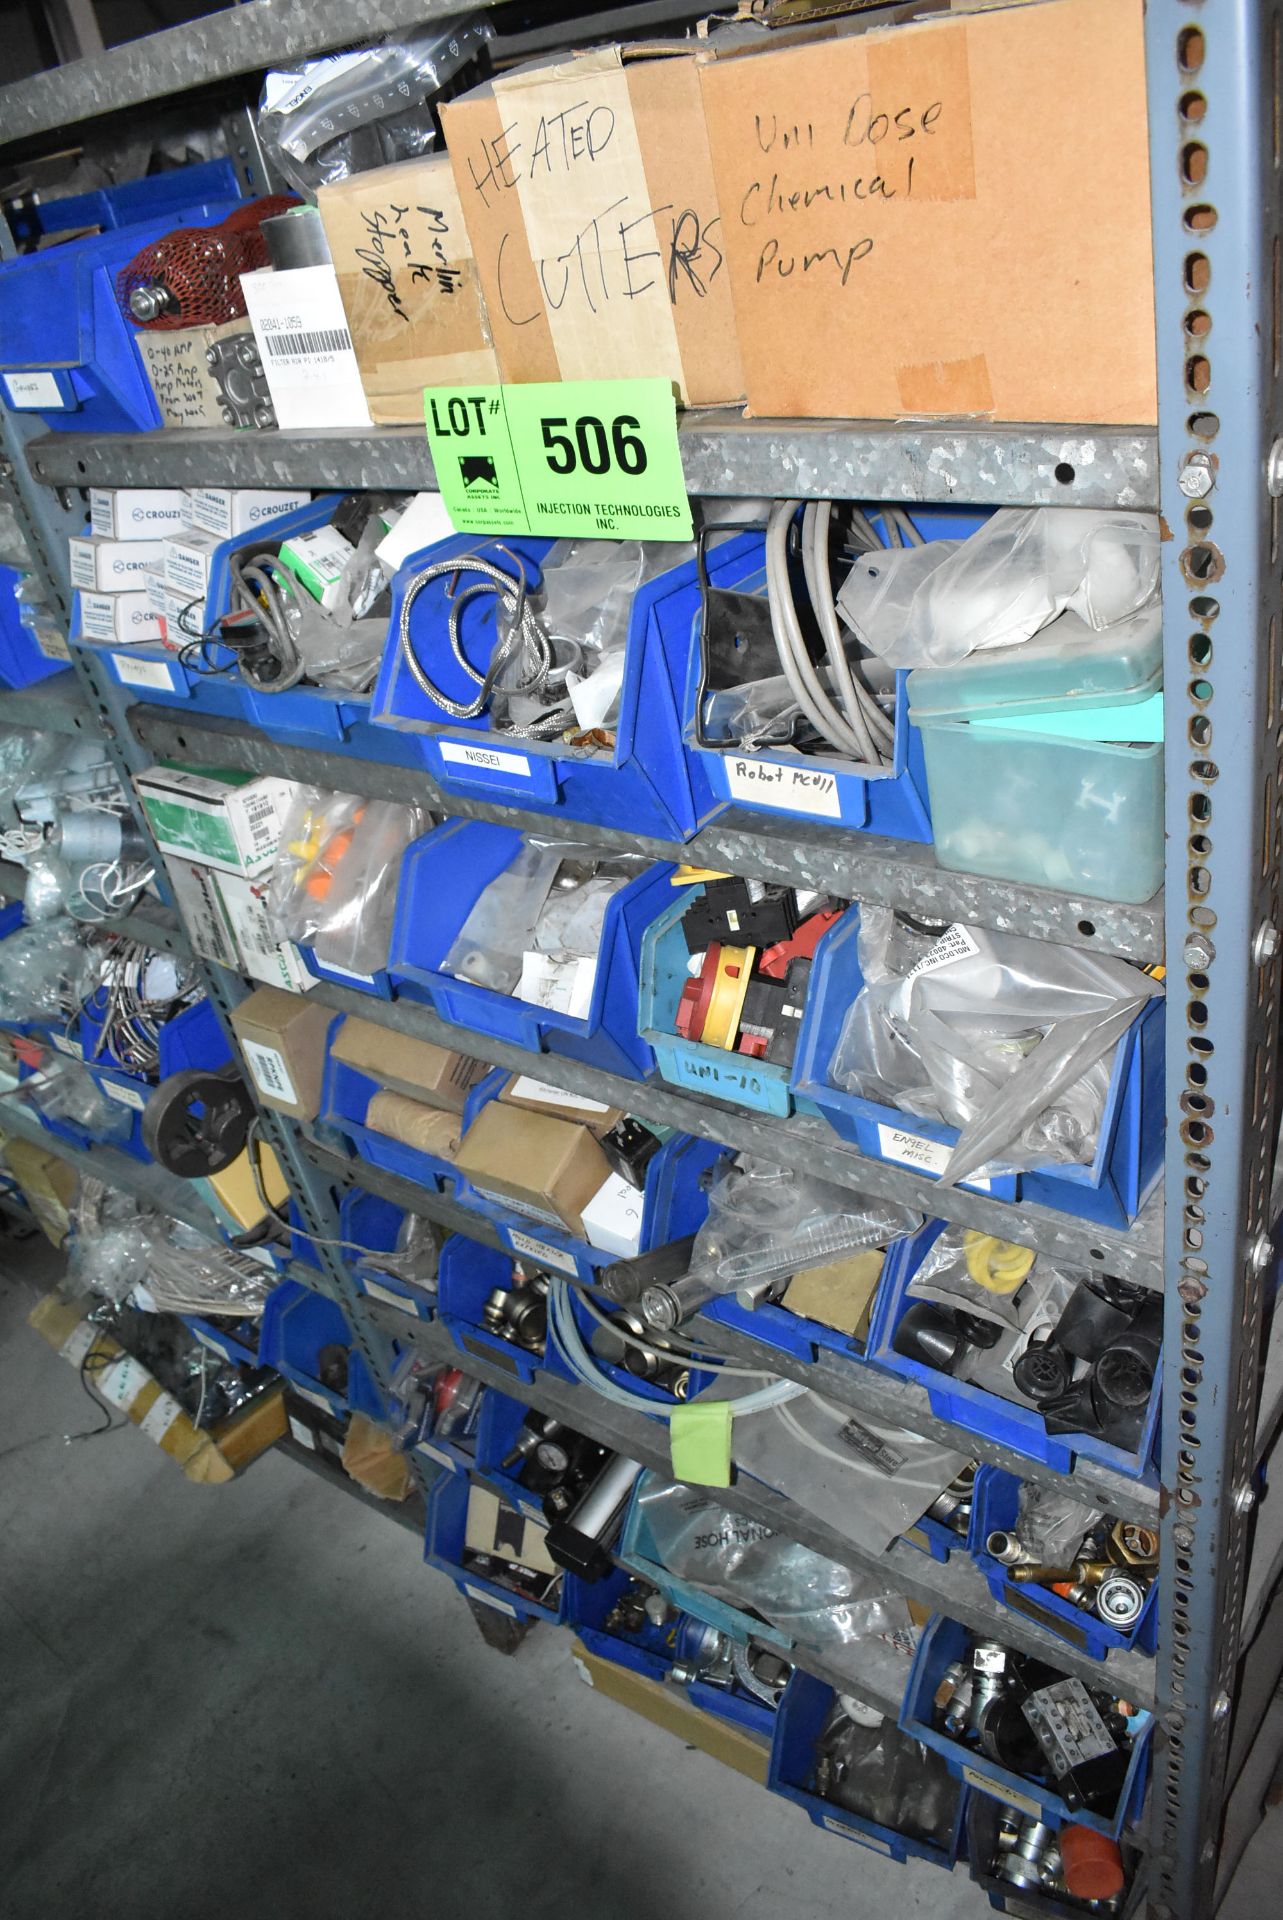 LOT/ CONTENTS OF SHELF CONSISTING OF ELECTRICAL SUPPLIES AND HARDWARE